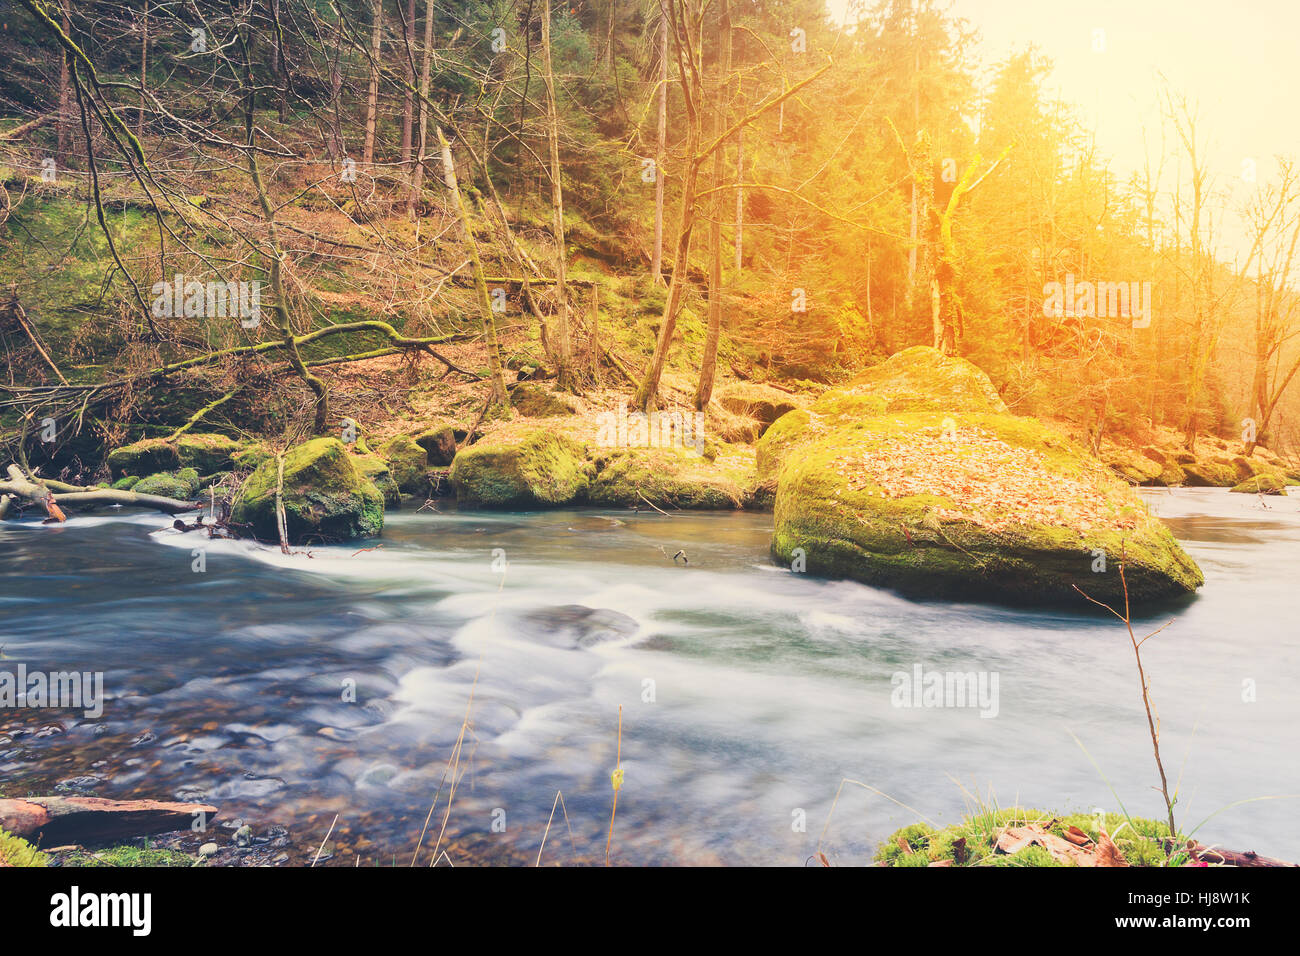 Free Images : rock, water, vacation, countryside, hill, forrest, plant,  green, natural landscape, fluvial landforms of streams, tree, watercourse,  riparian zone, groundcover, sky, mountain river, arroyo, bedrock, jungle,  creek, valley, temperate broadleaf